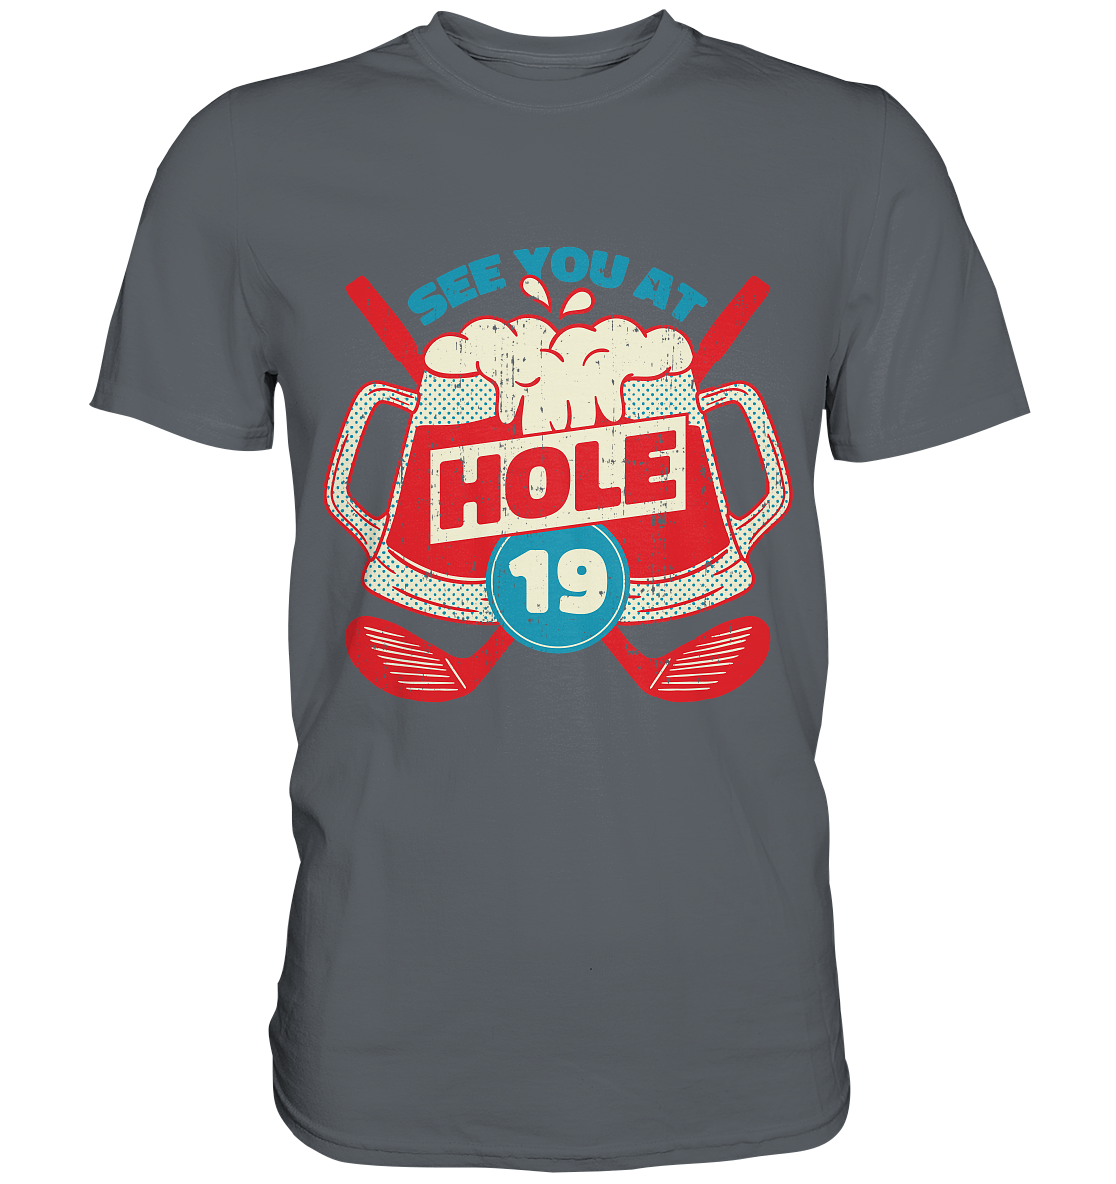 Golf ,See you at Hole 19 , Wir sehen uns bei Loch 19 - Classic Shirt